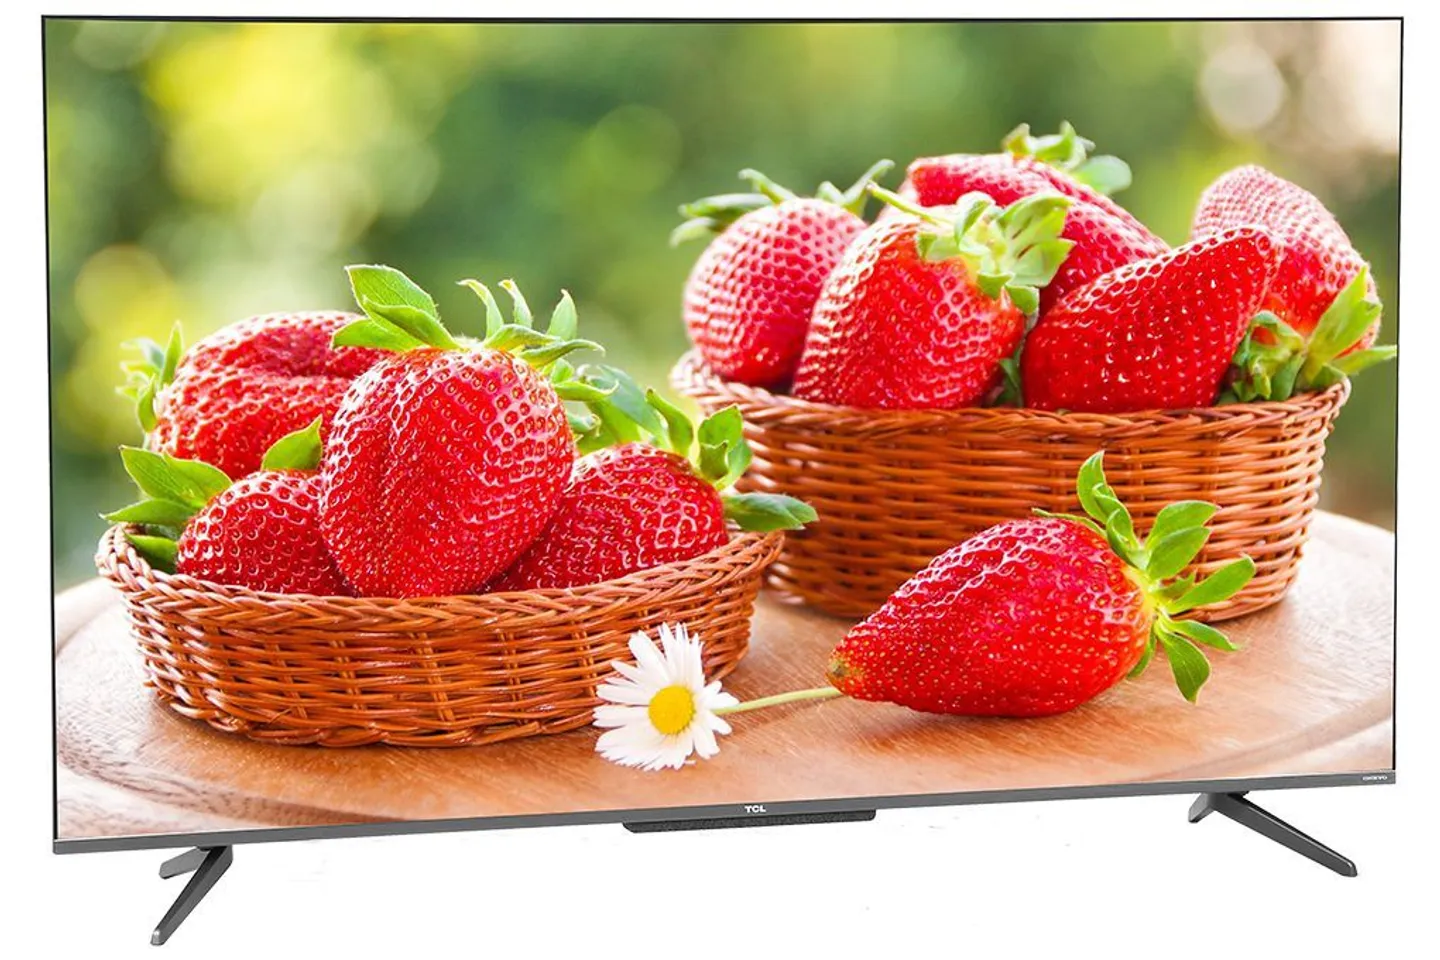 Android Tivi QLED TCL 55Q726 55 inch 4K